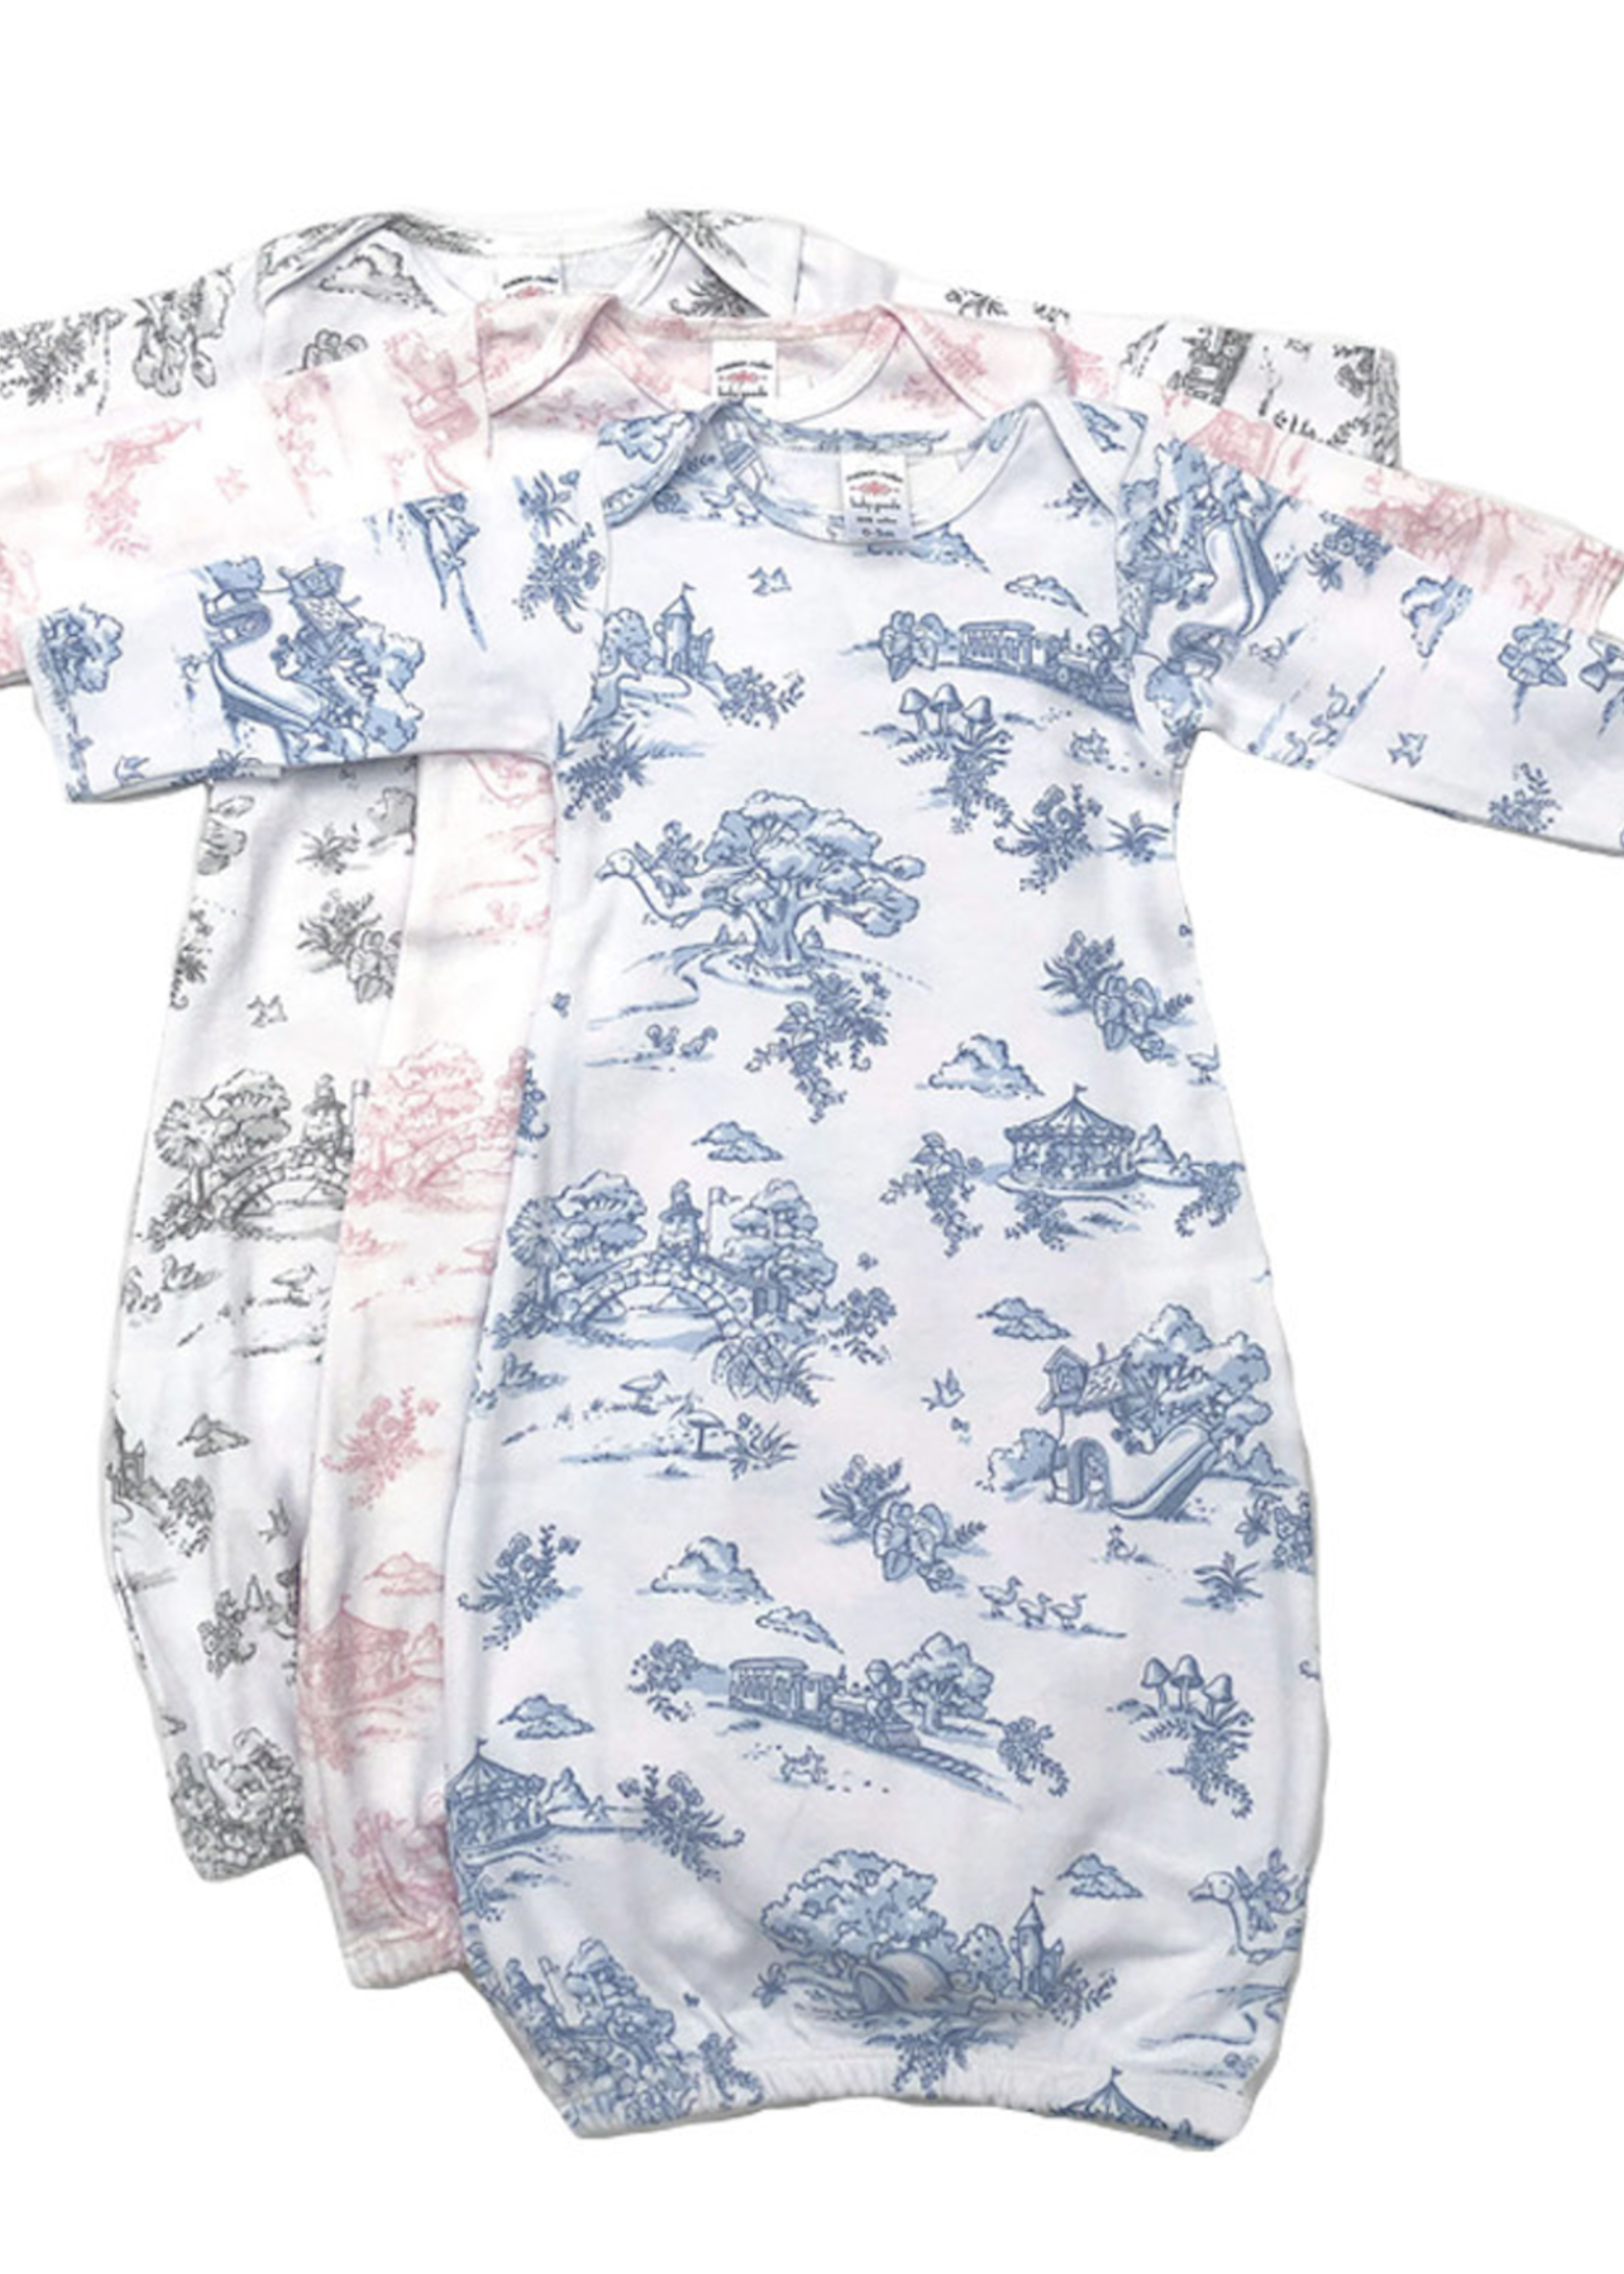 Maison Nola Baby Toile Gown Pink 3-6 month